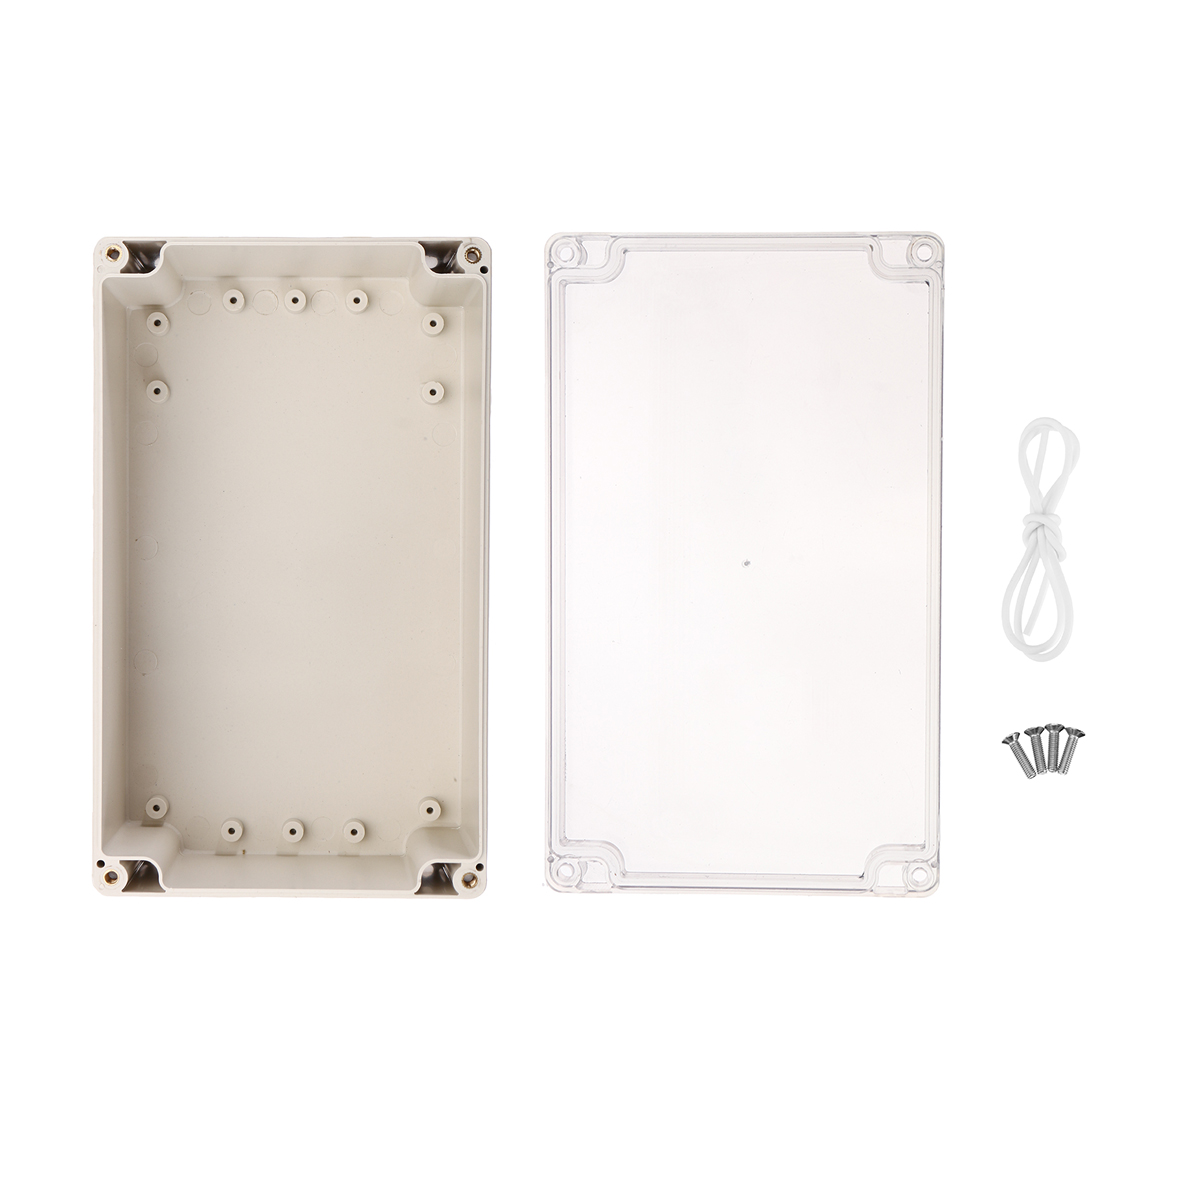 Plastic-Waterproof-Electronic-Project-Box-Clear-Cover-Electronic-Project-Case-20012075mm-1595734-4